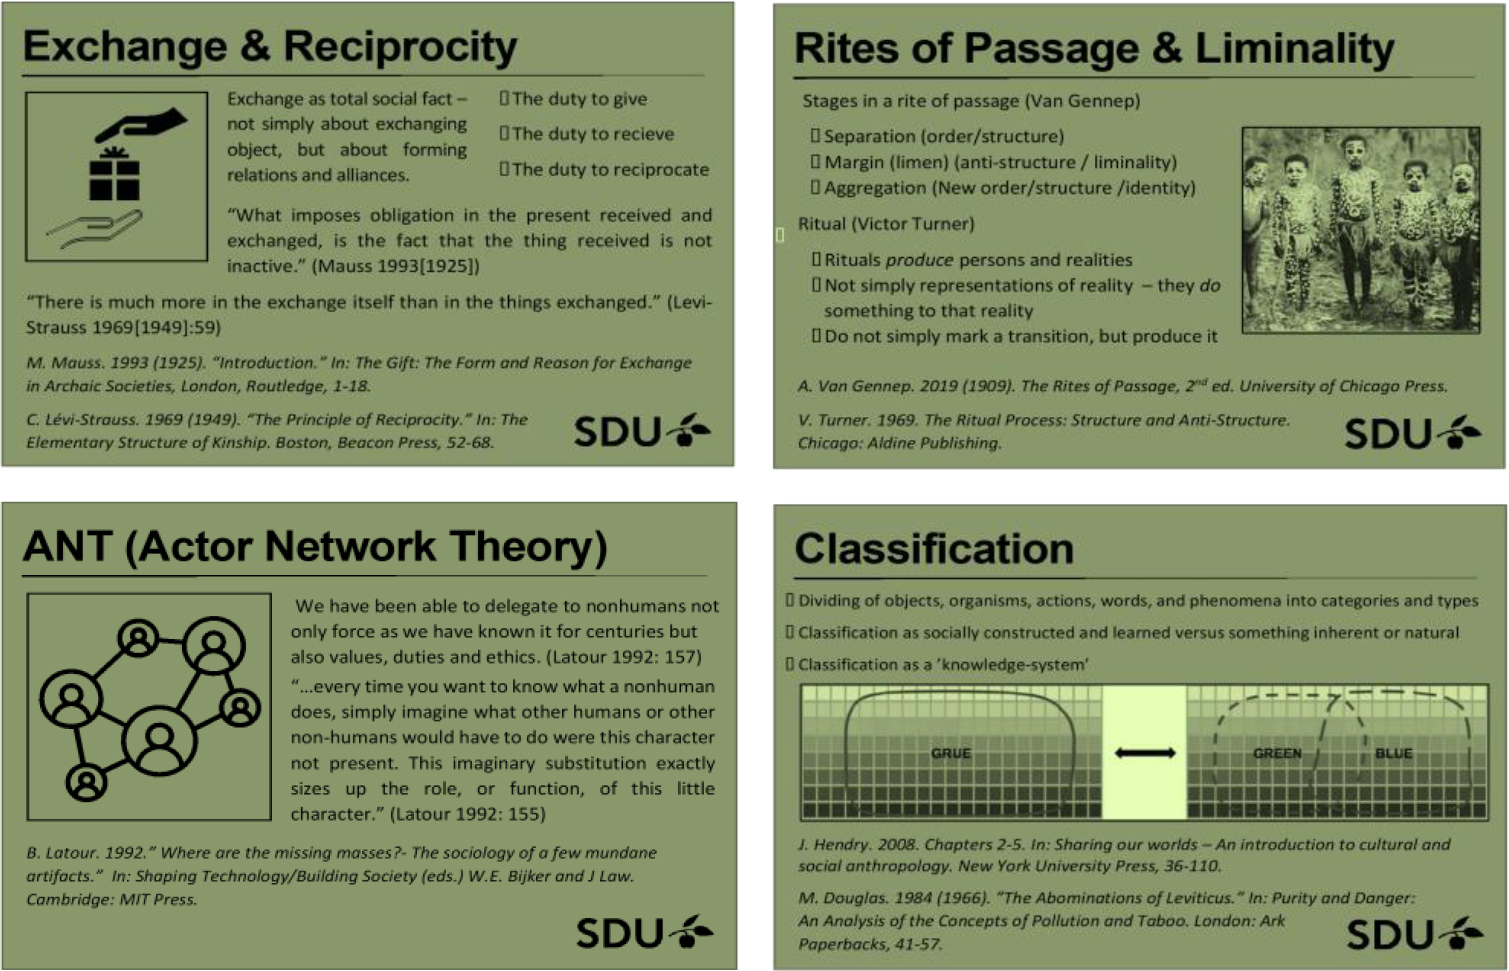 A group of four Theory Cards, each are green postcard sized cardstock, printed with a title depicting a theoretical concept or perspective. Beneath the title is a short explanation that conveys the essence of the theory, along with a quotation and reference from the academic source and an example explicating the theory. Each card features an illustration.